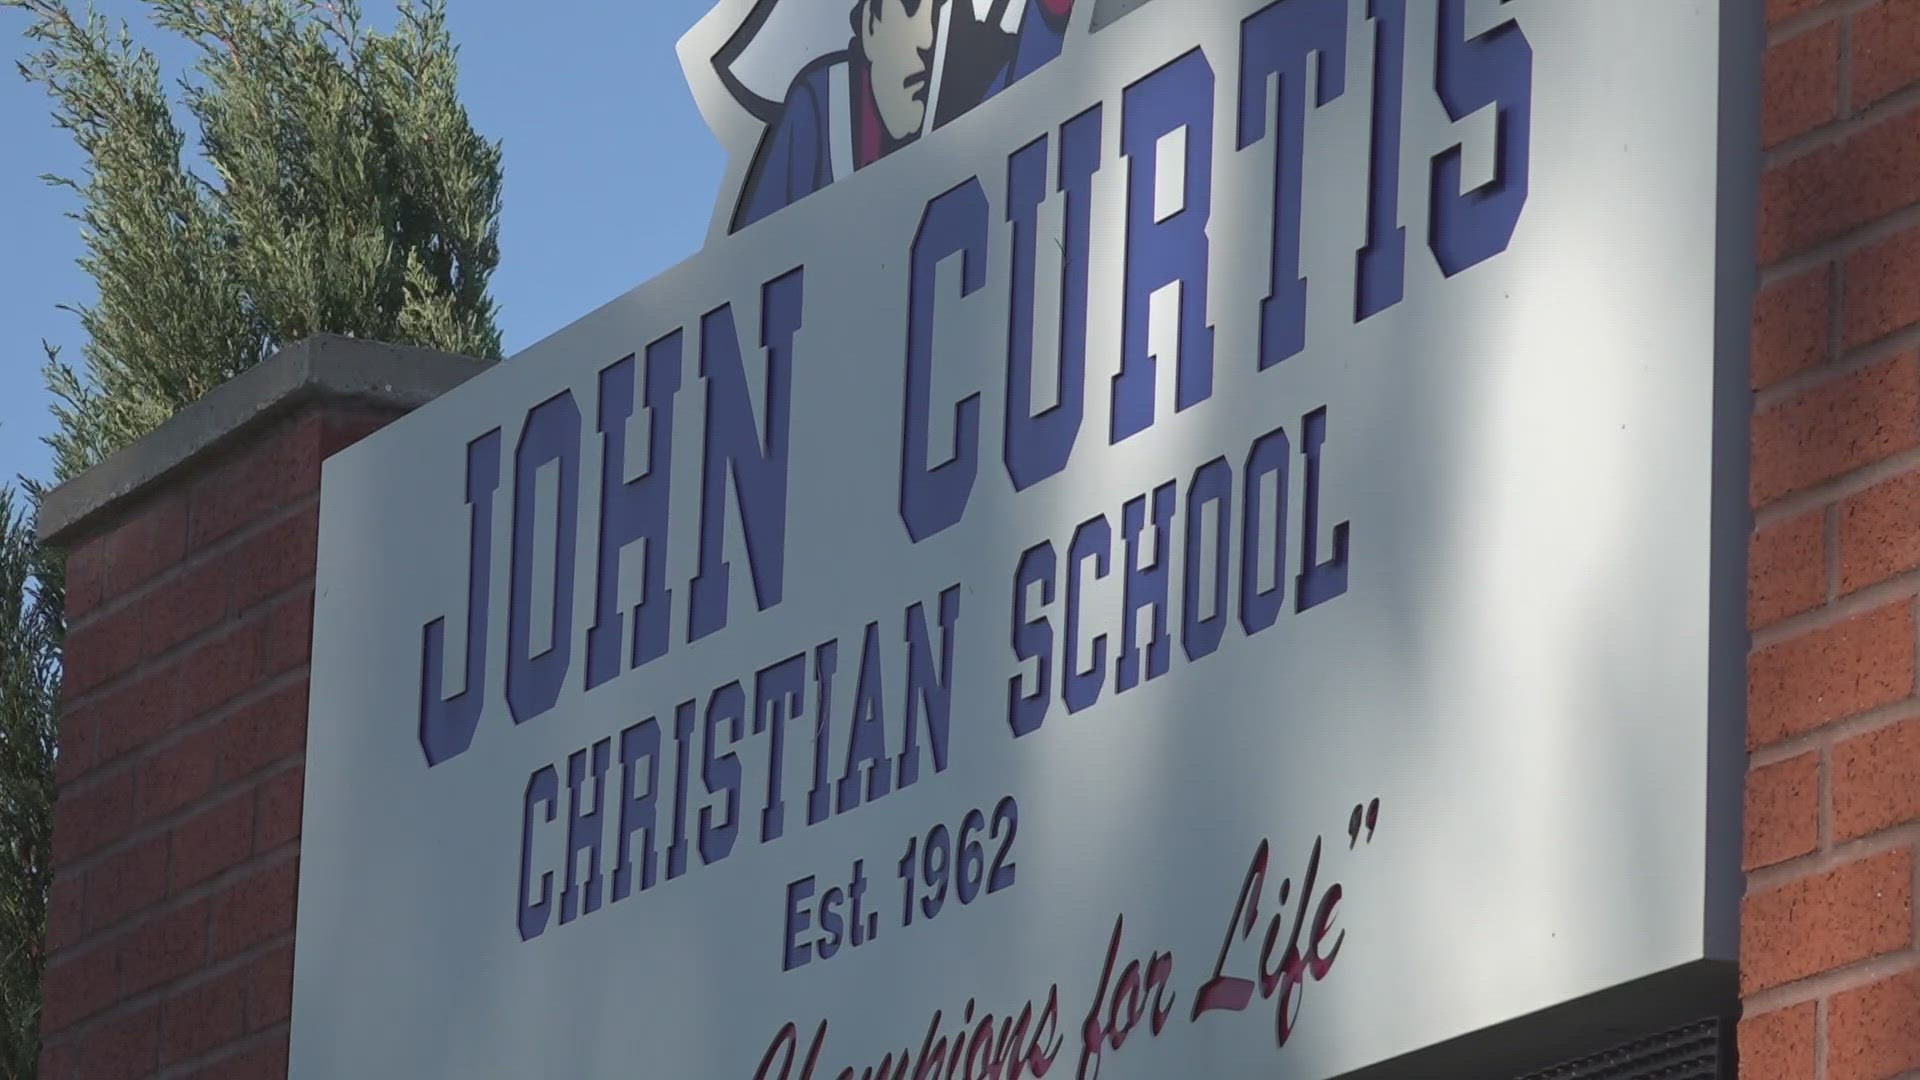 John Curtis Christian School celebrated its head coach’s win Friday as tying a major record. But old forfeits are complicating the matter.